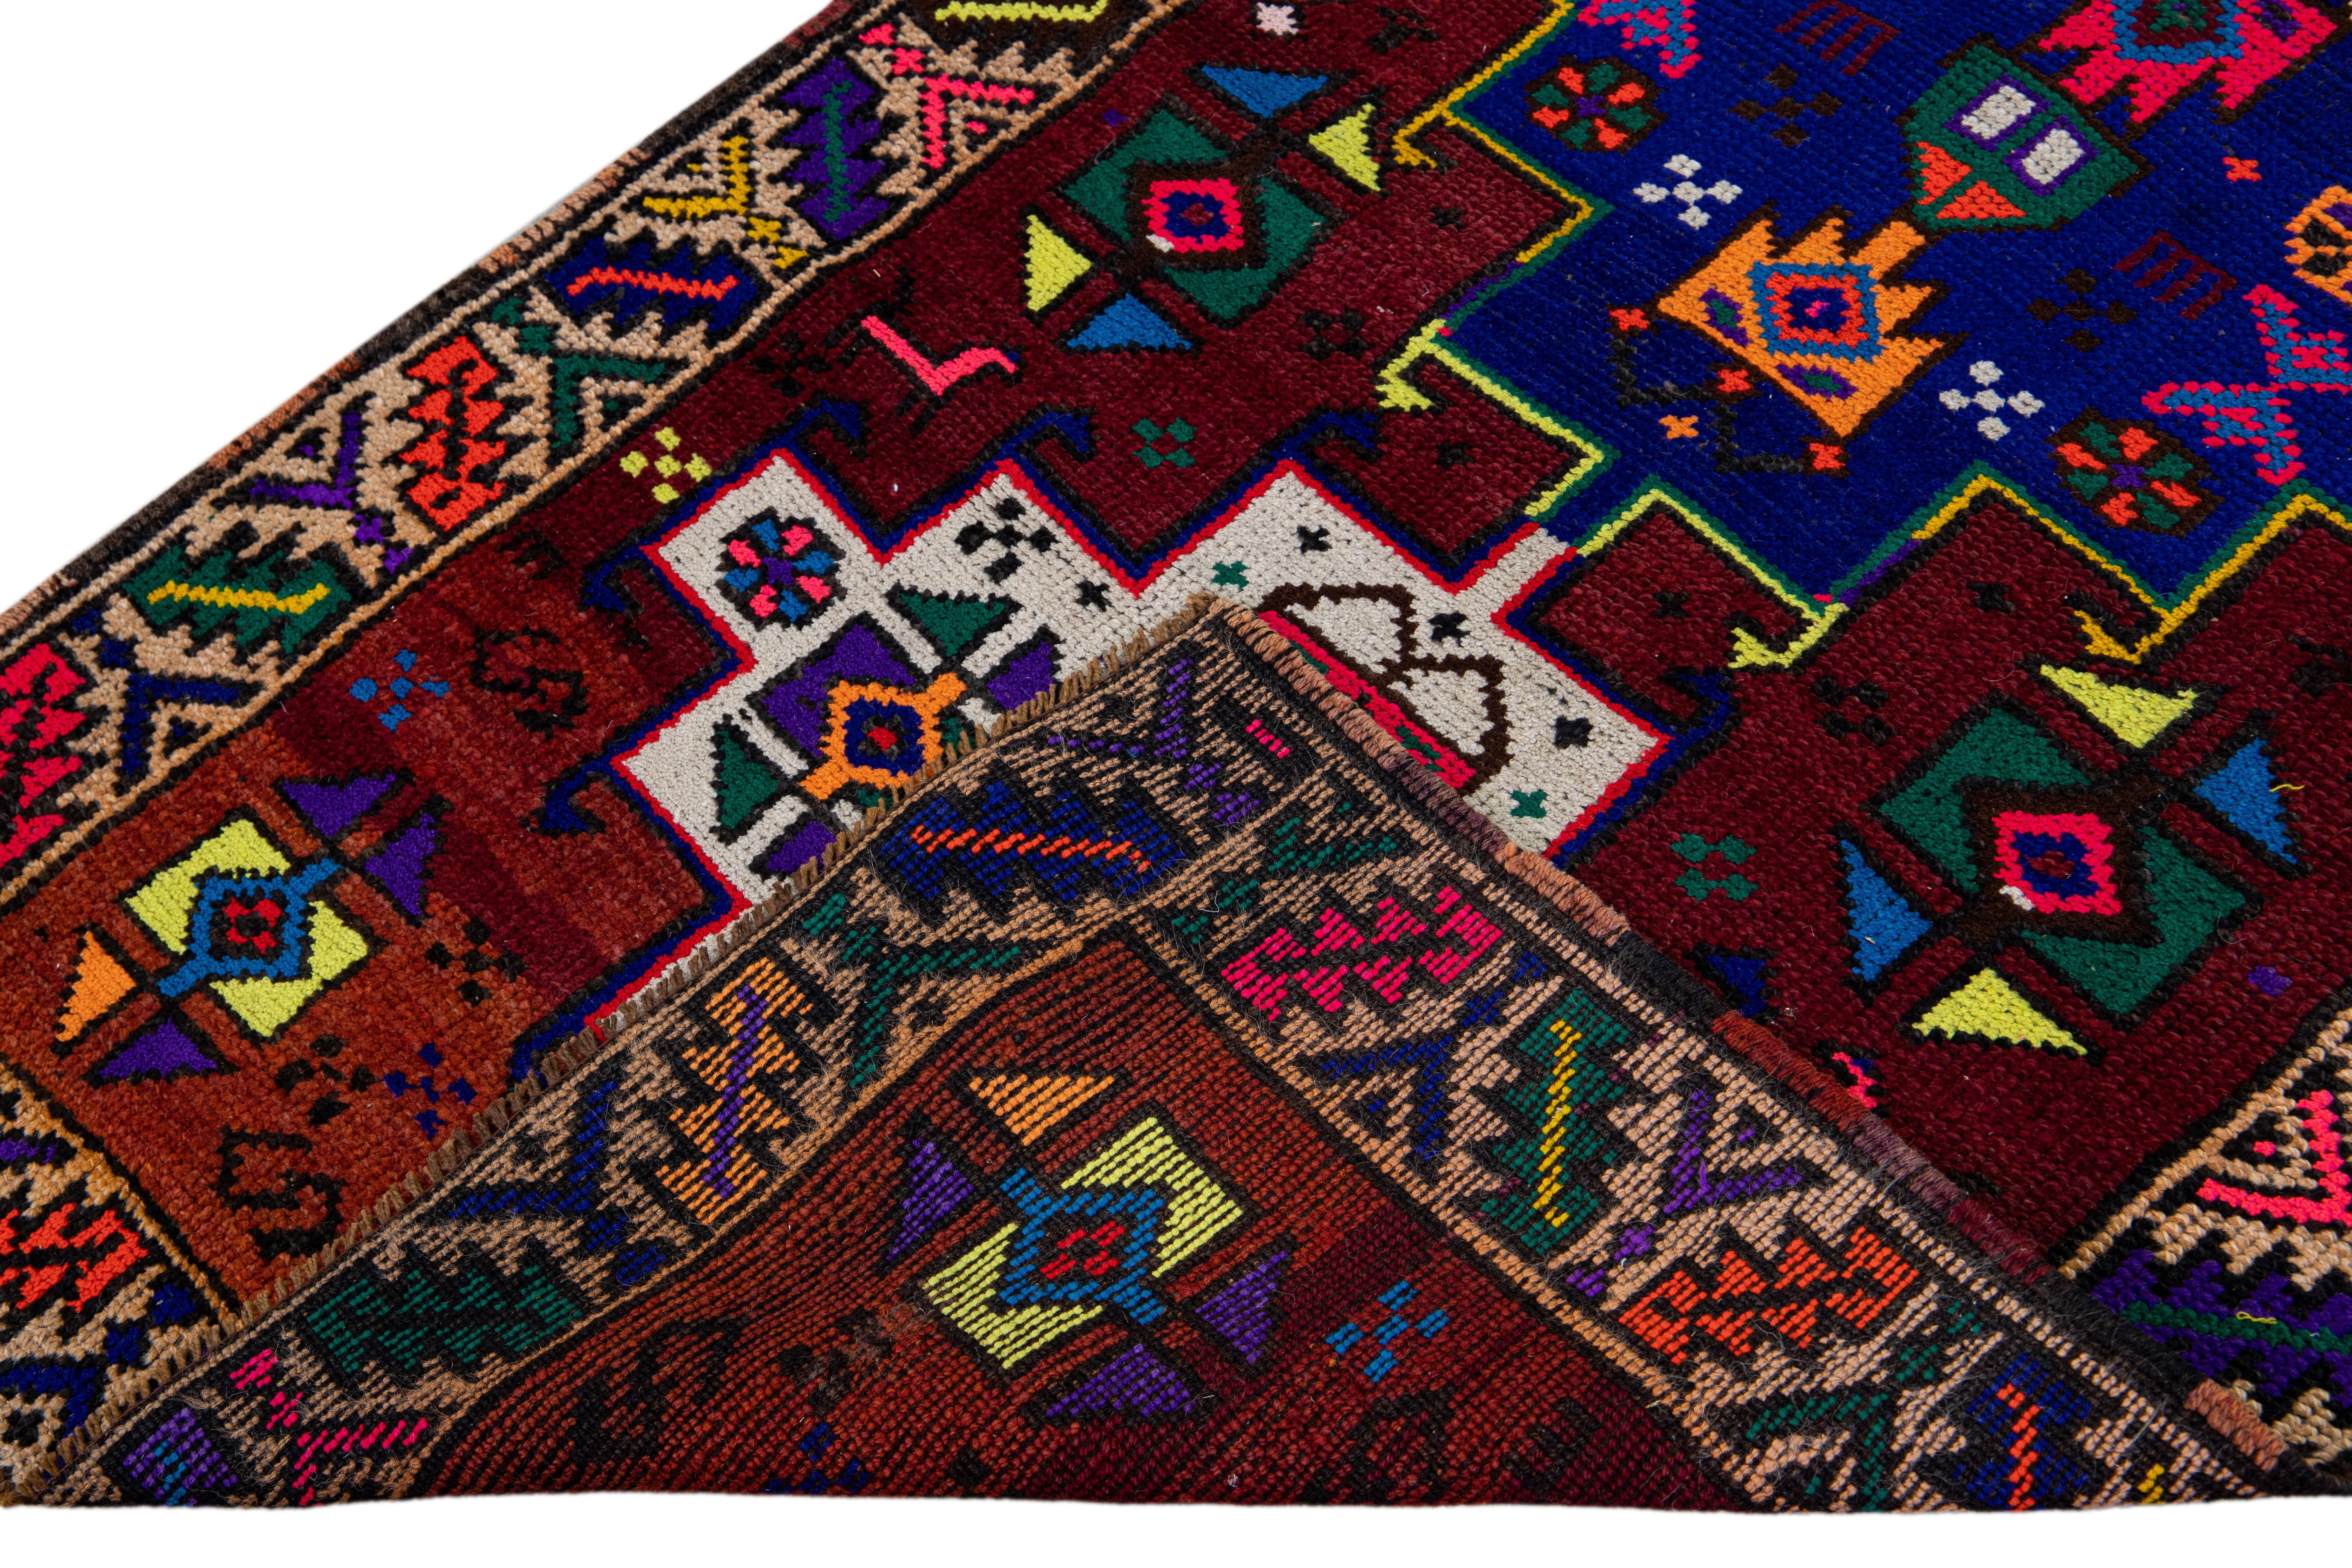 Beautiful vintage Turkish hand-knotted wool rug with a burgundy field. This rug has a tan designed frame and multicolor accents in a gorgeous all-over geometric tribal design.

This rug measures: 3' x 12'10